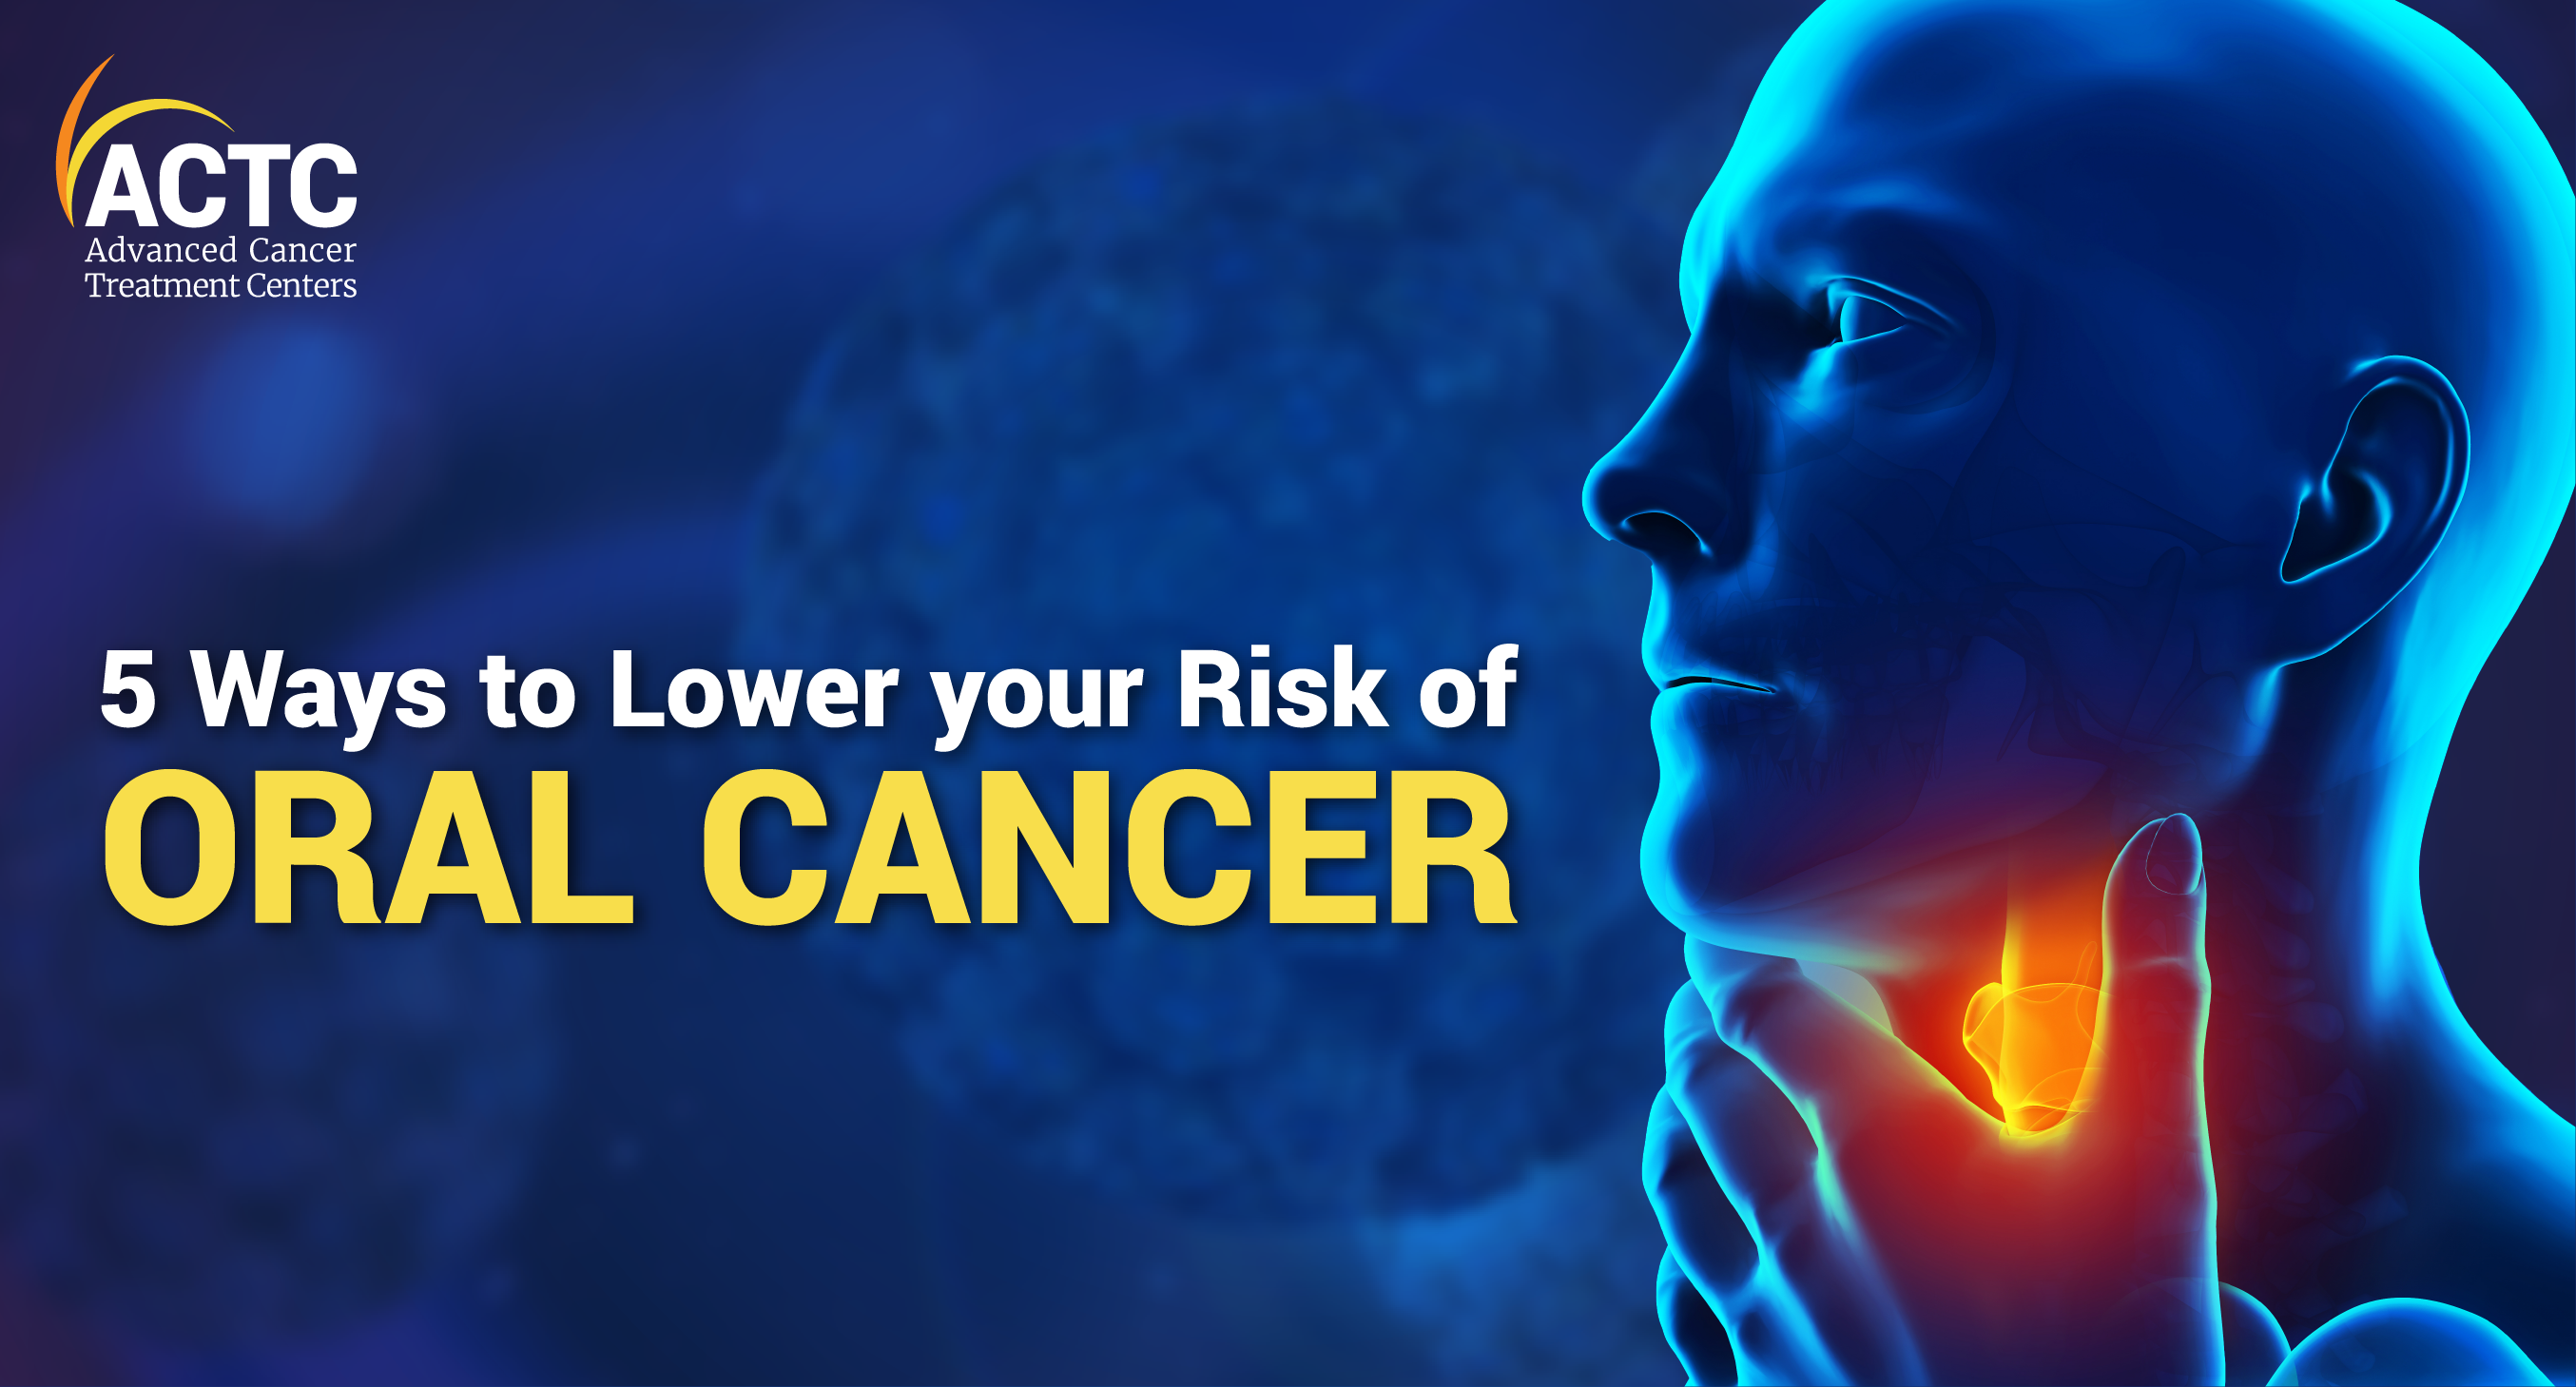 5 Ways to Lower Your Risk of Oral Cancer